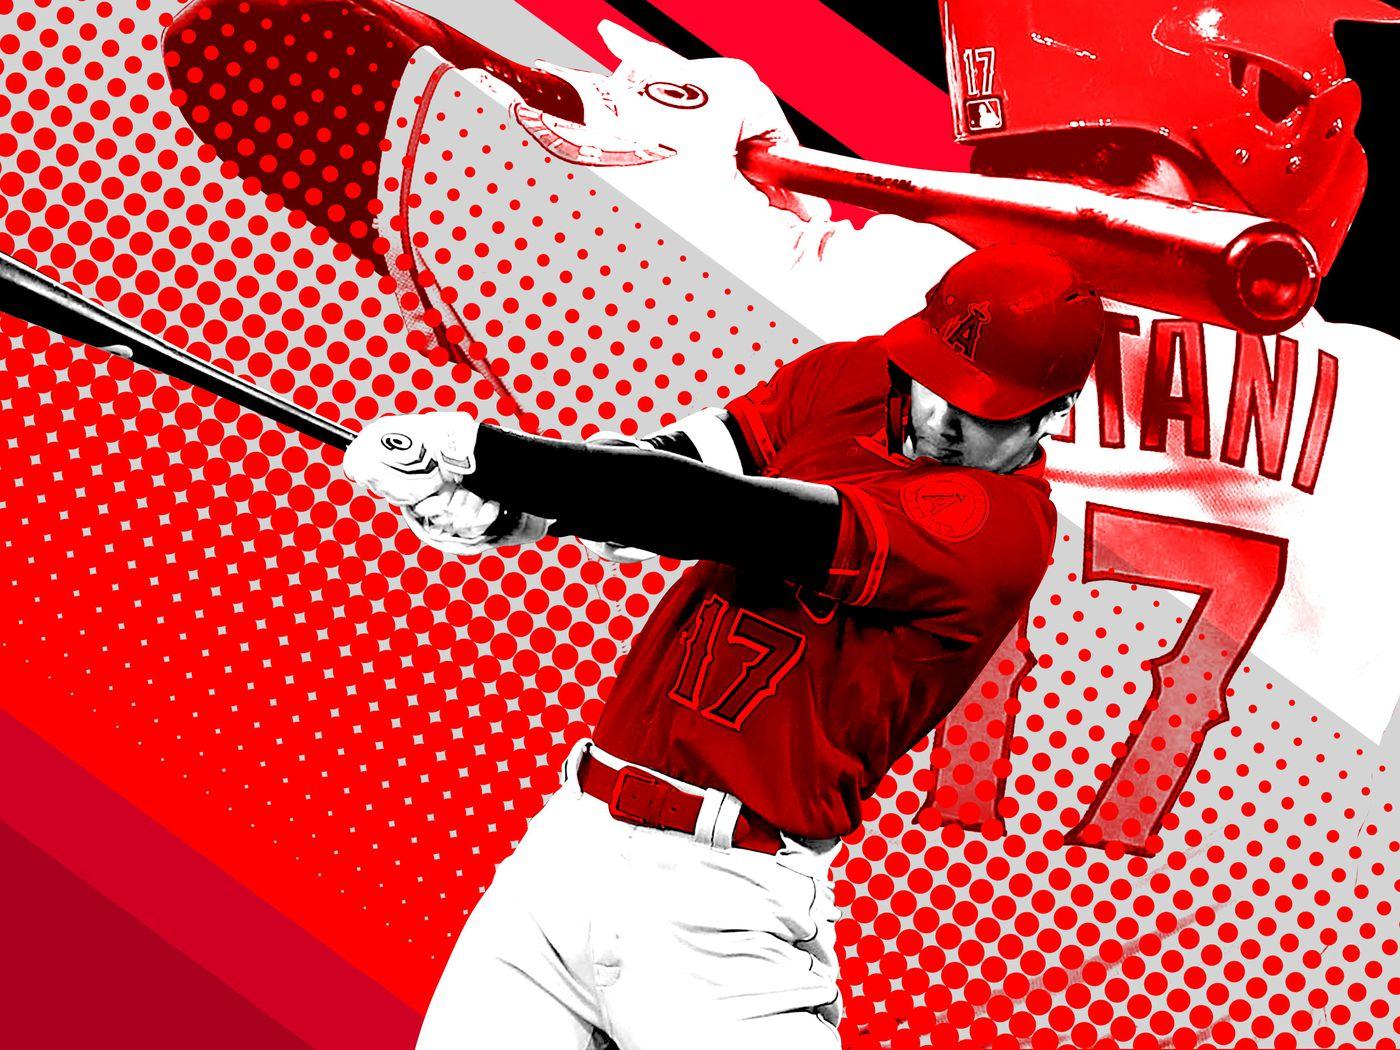 The Los Angeles Angels' Shohei Ohtani Is the Most Exciting DH in MLB